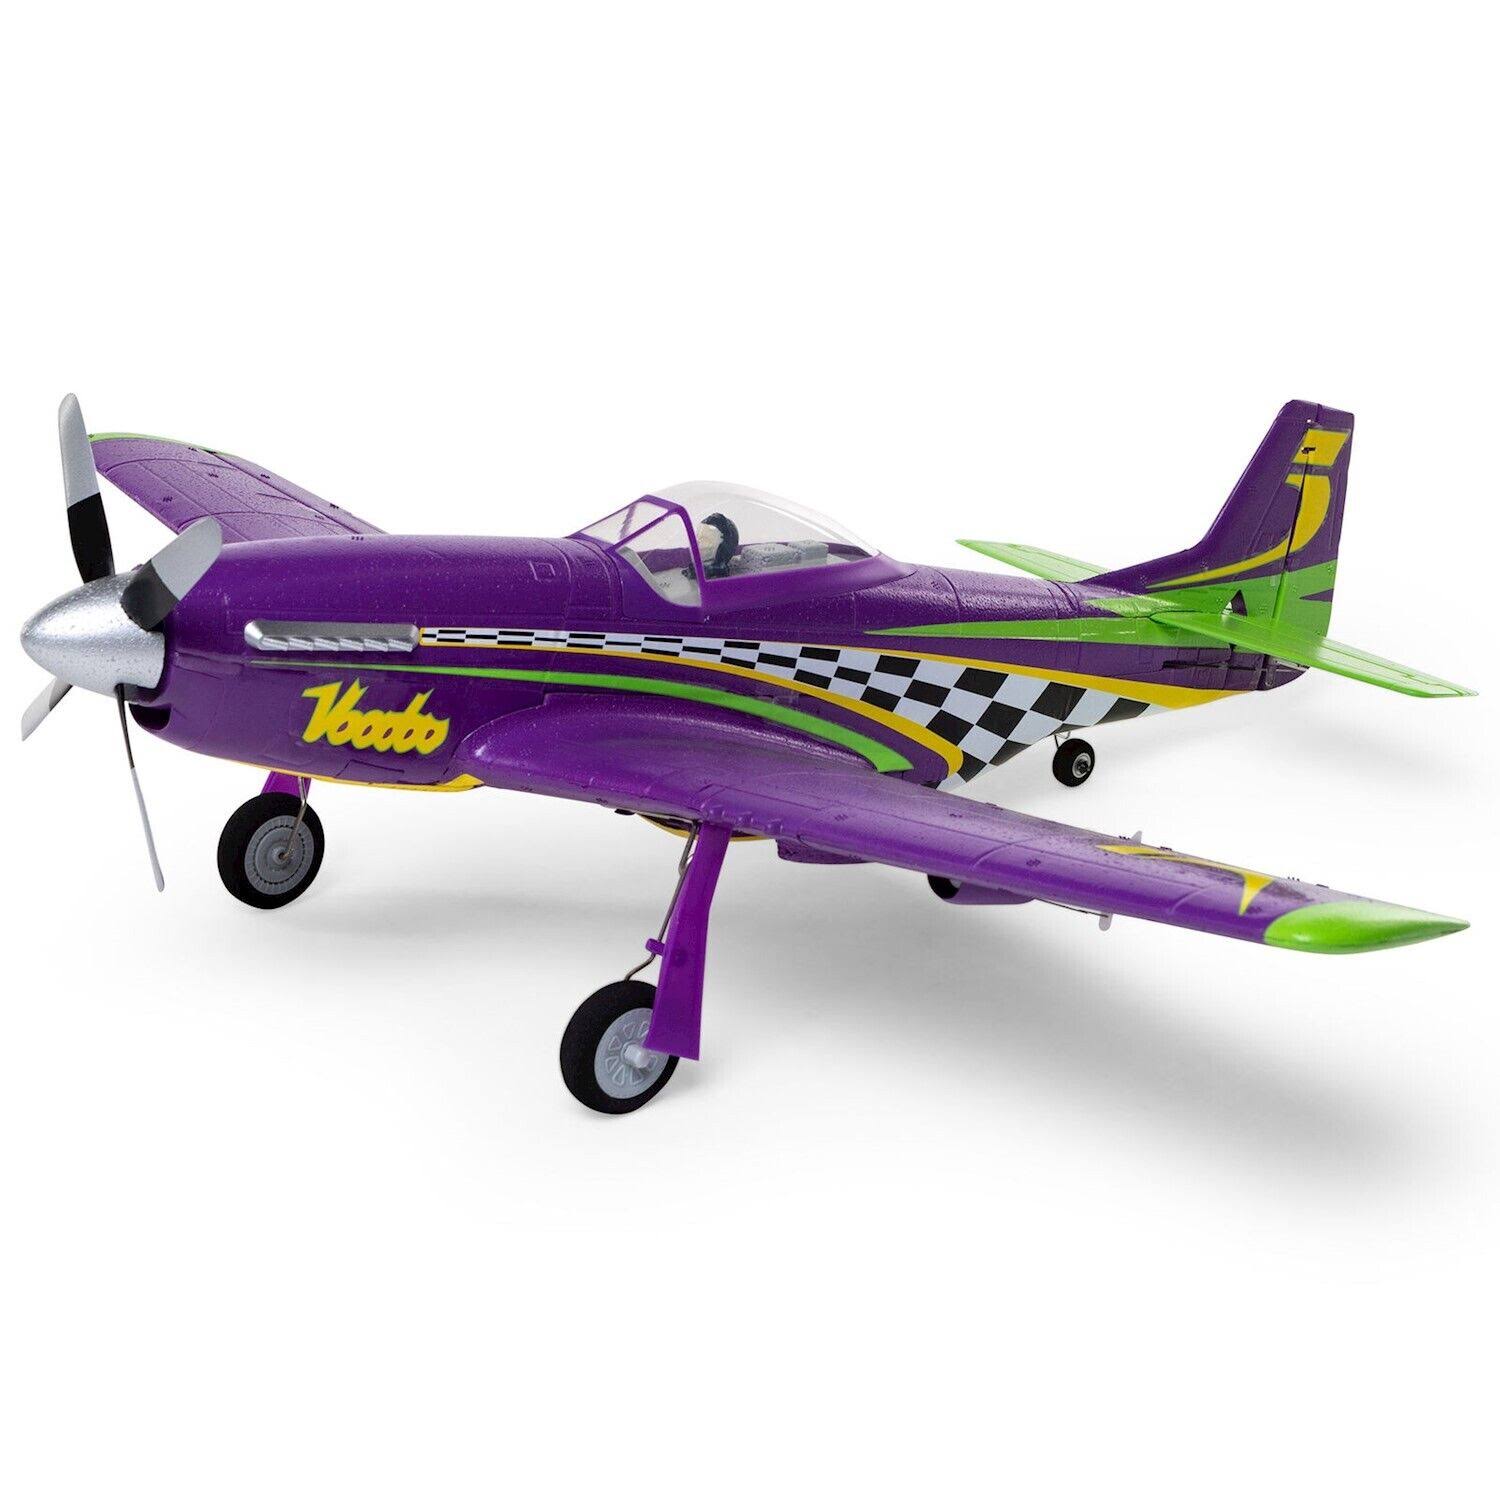 E-flite UMX P-51D Voodoo BNF Basic with AS3X and Safe Select EFLU4350